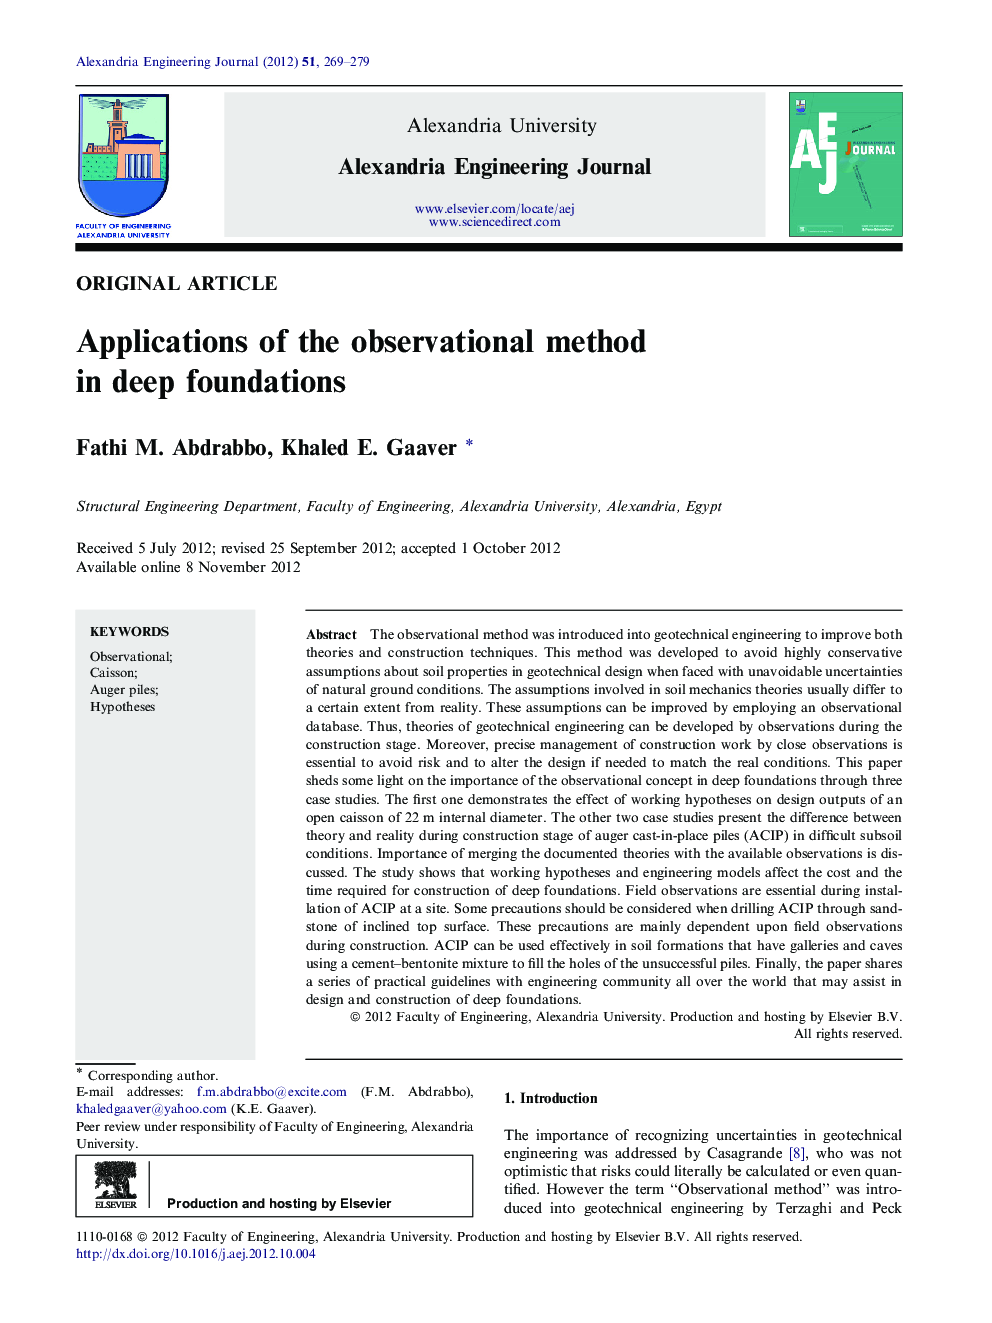 Applications of the observational method in deep foundations